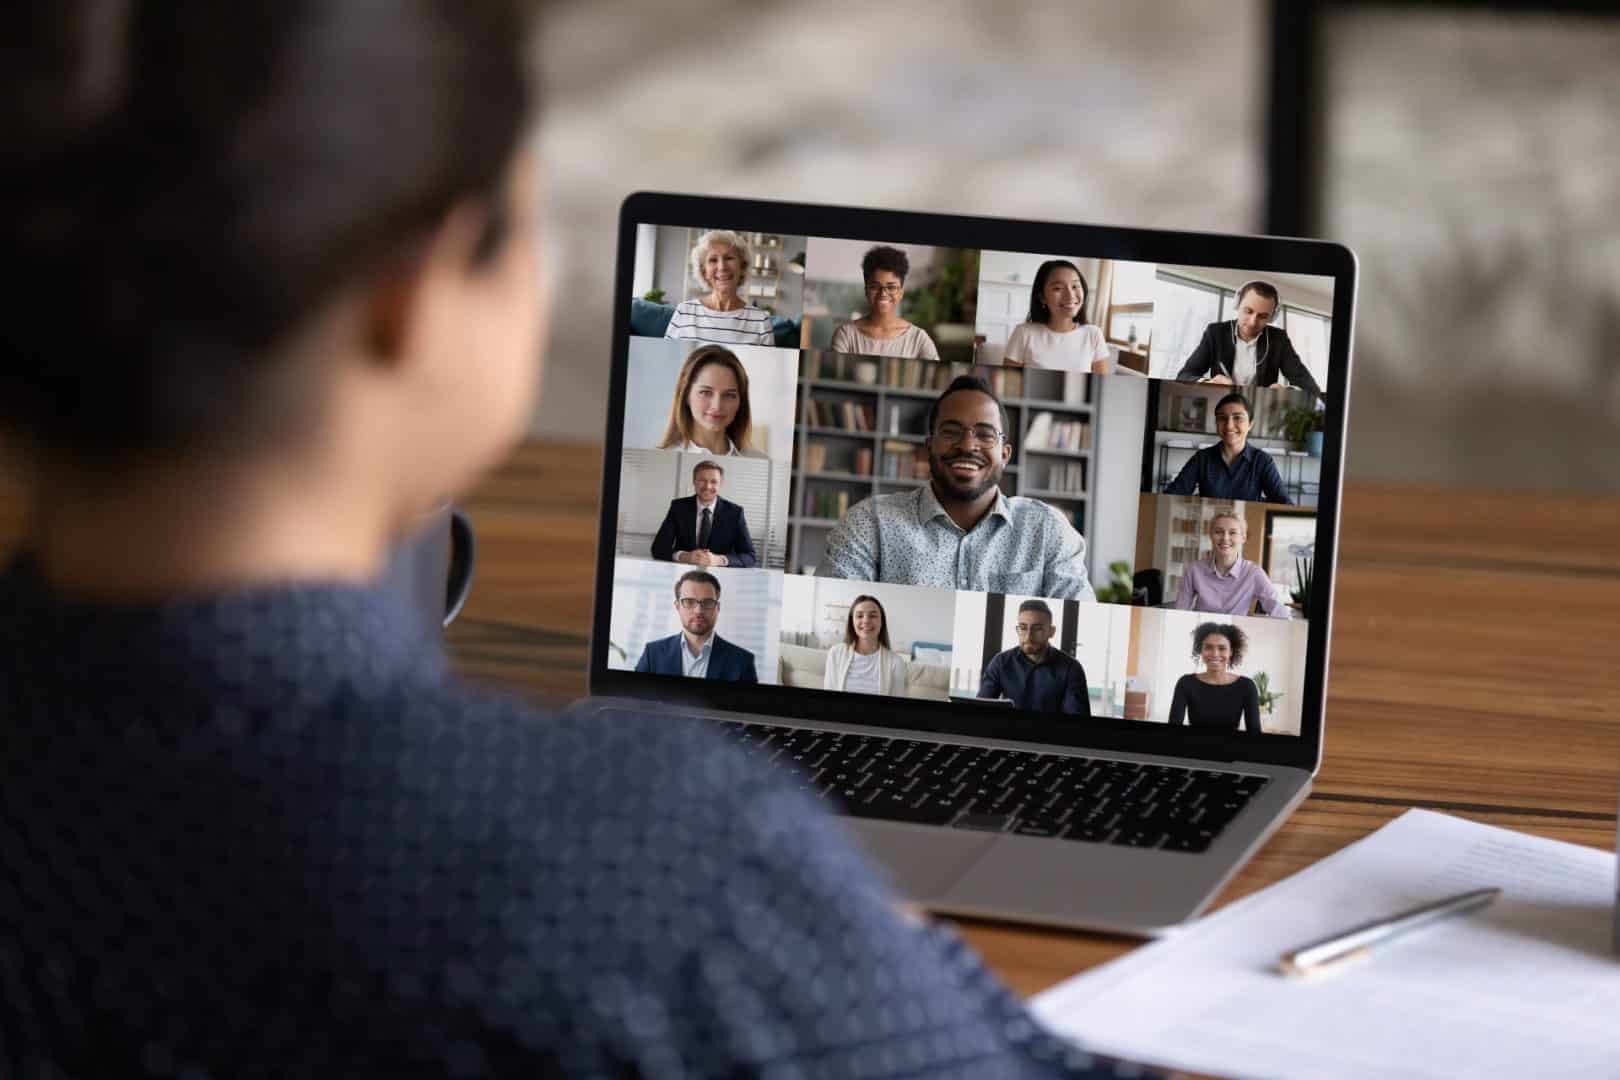 video training for employees - New Hire’s First Day - Improve employees communication skills at Workplace